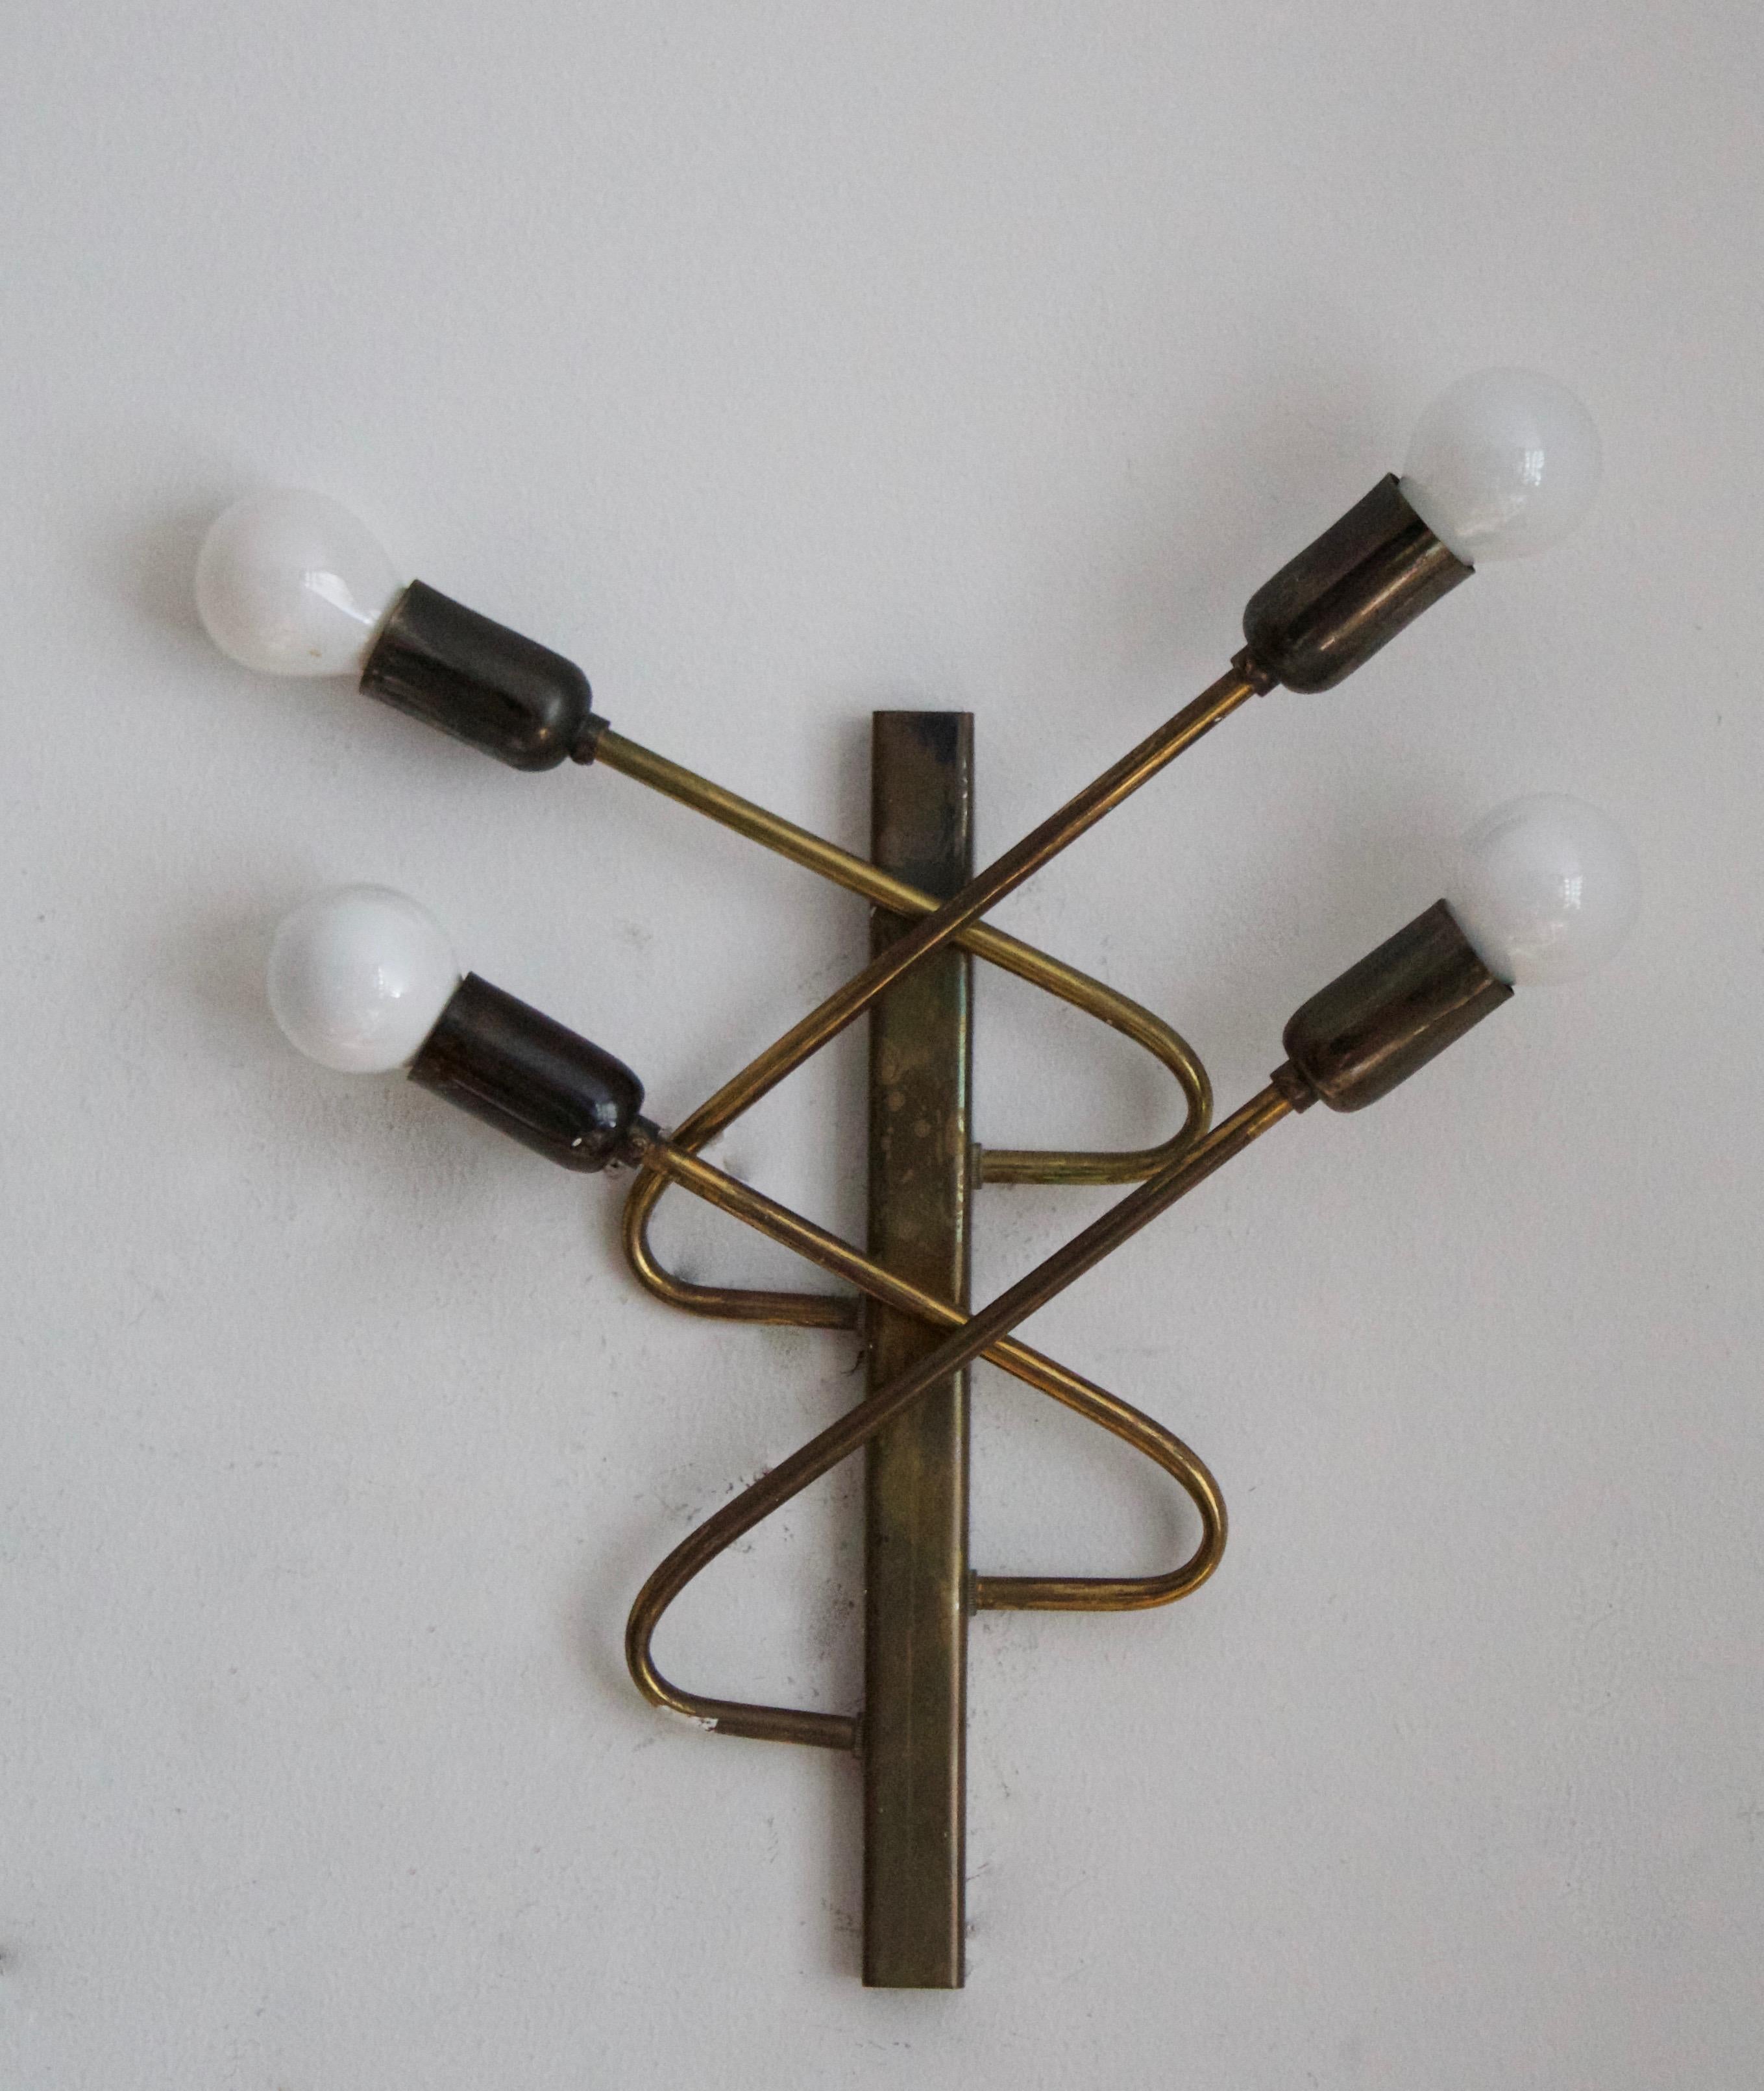 A pair of wall light / scones. Designed and produced in Italy, 1940s-1950s

Other designers of the period include Paavo Tynell, Jean Royère, Hans Bergström, Hans-Agne Jakobsson, and Kaare Klint.